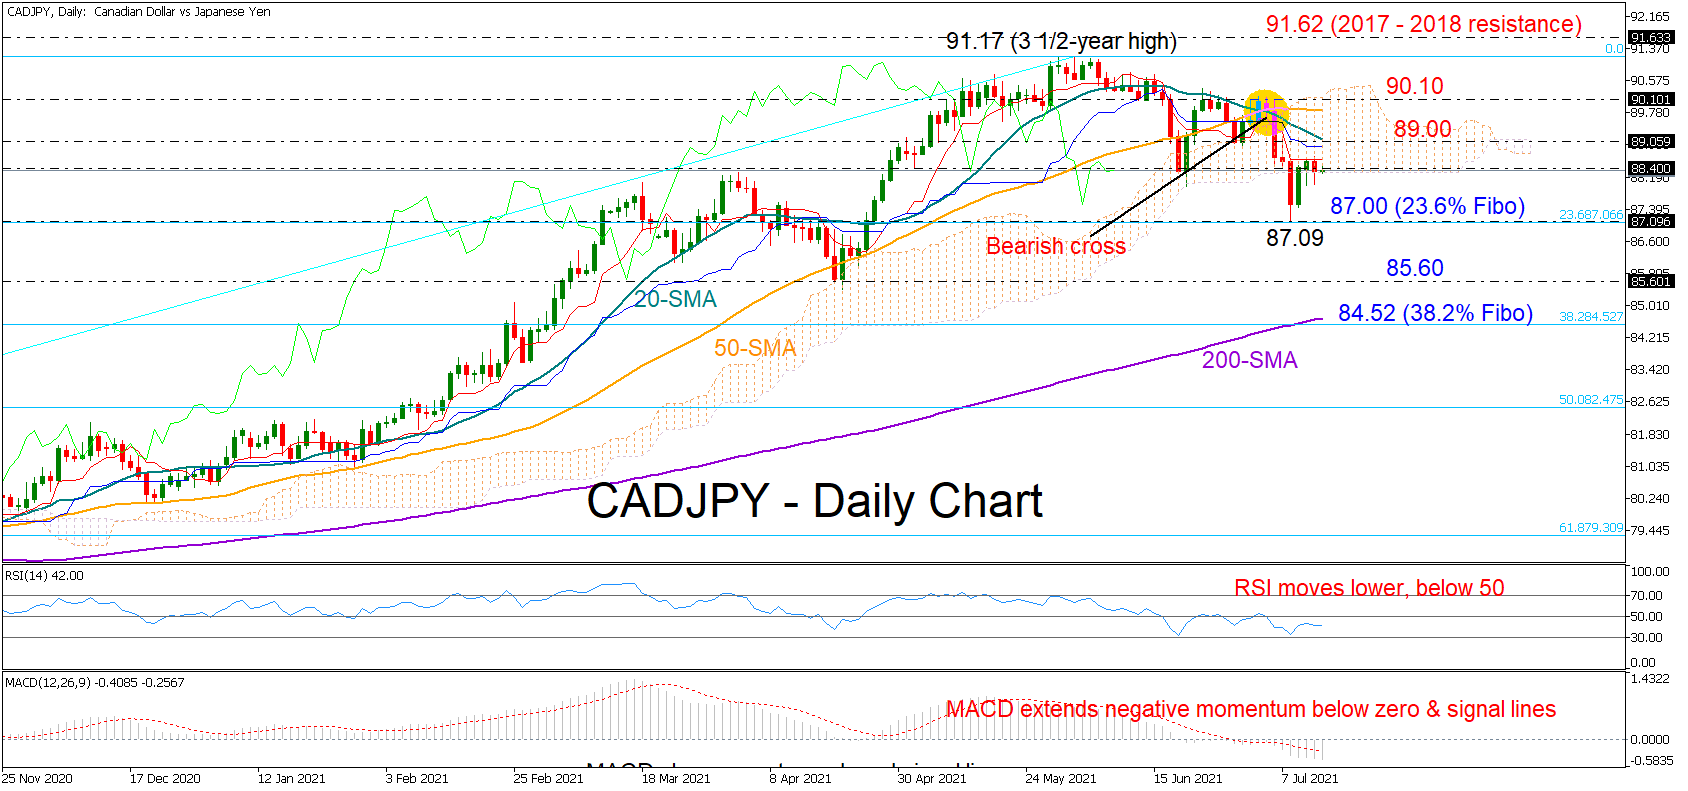 Technical Analysis – CADJPY points to trend deterioration